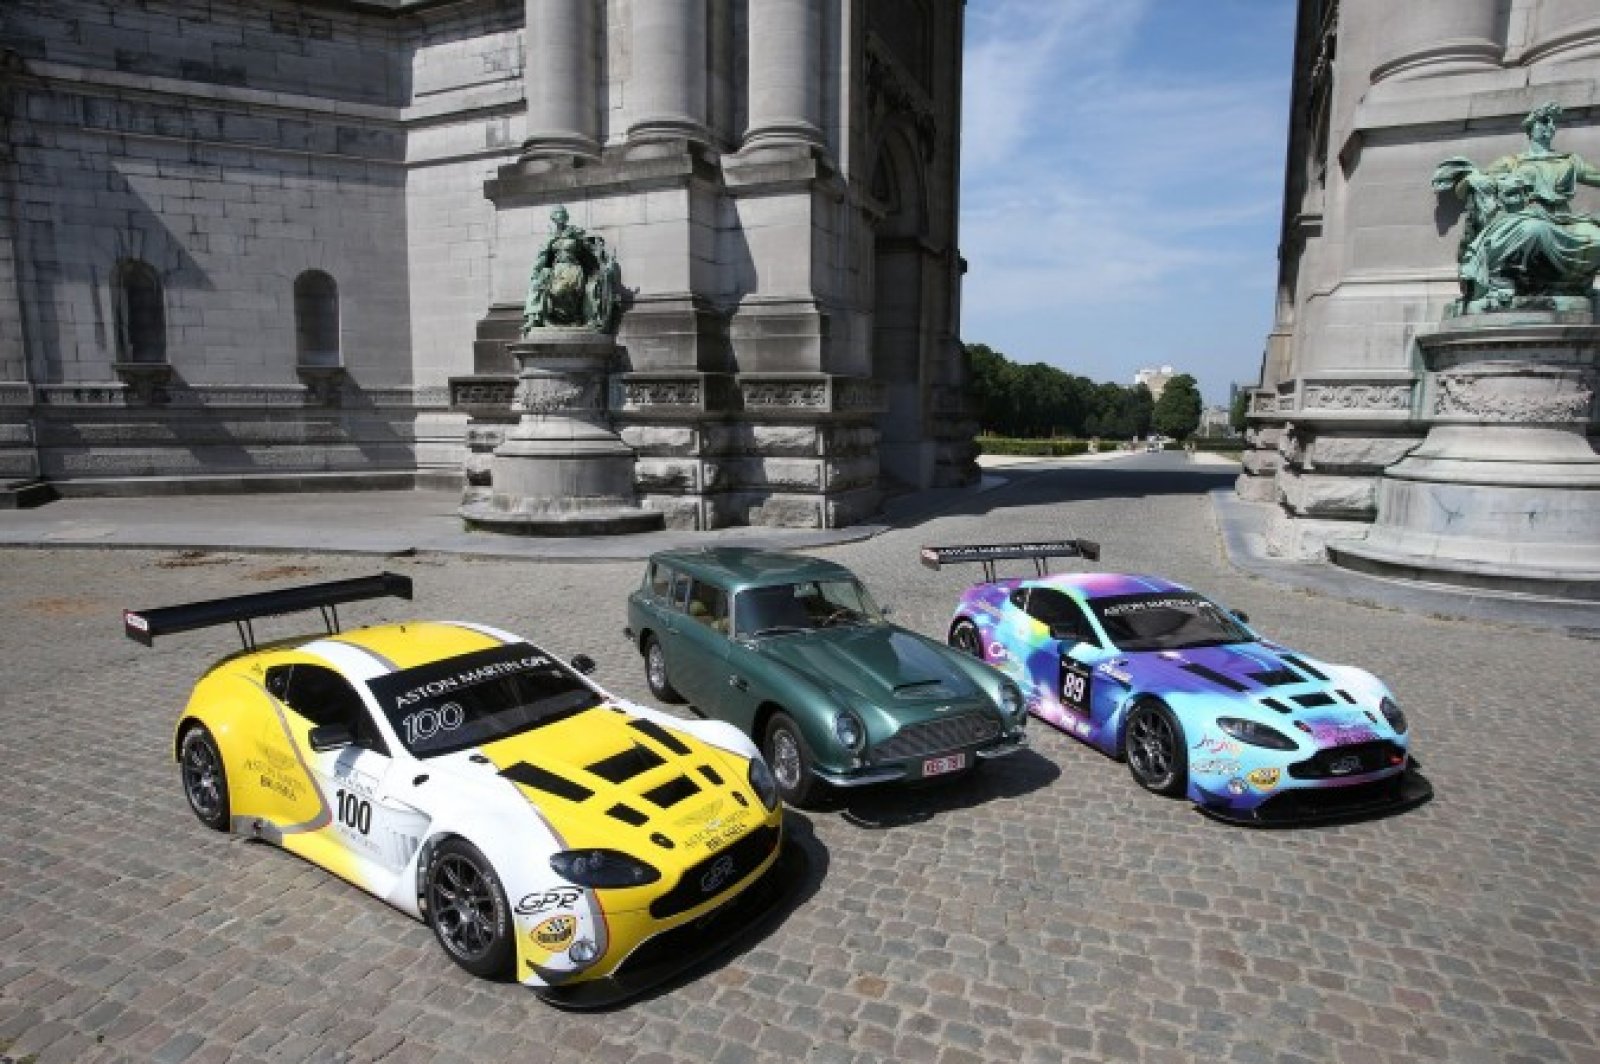 Aston Martin Brussels by GPR Racing ready for the major event!